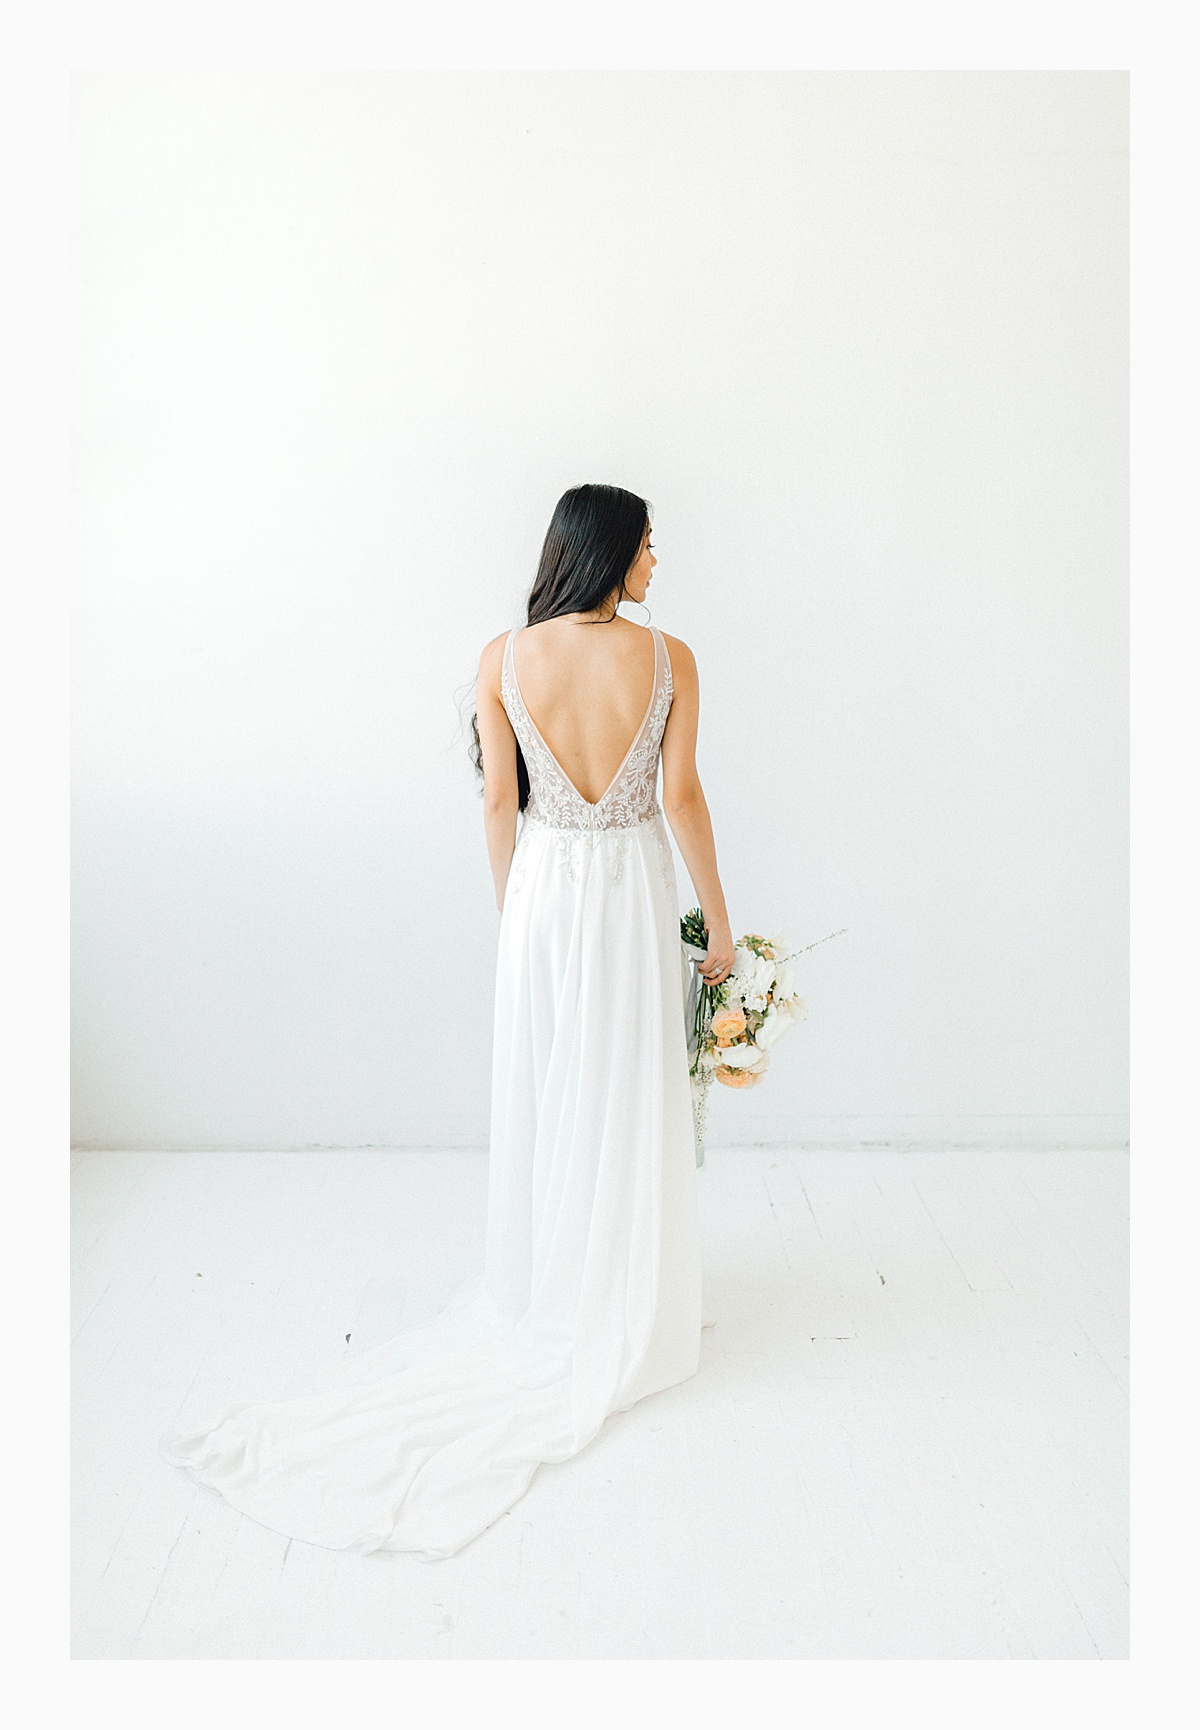 The Bemis Building in downtown Seattle is one of my favorite places to use for photo shoots!  This styled bridal shoot with touches of peach and white was dreamy.  #emmarosecompany #kindredpresets #seattlebride_0016.jpg